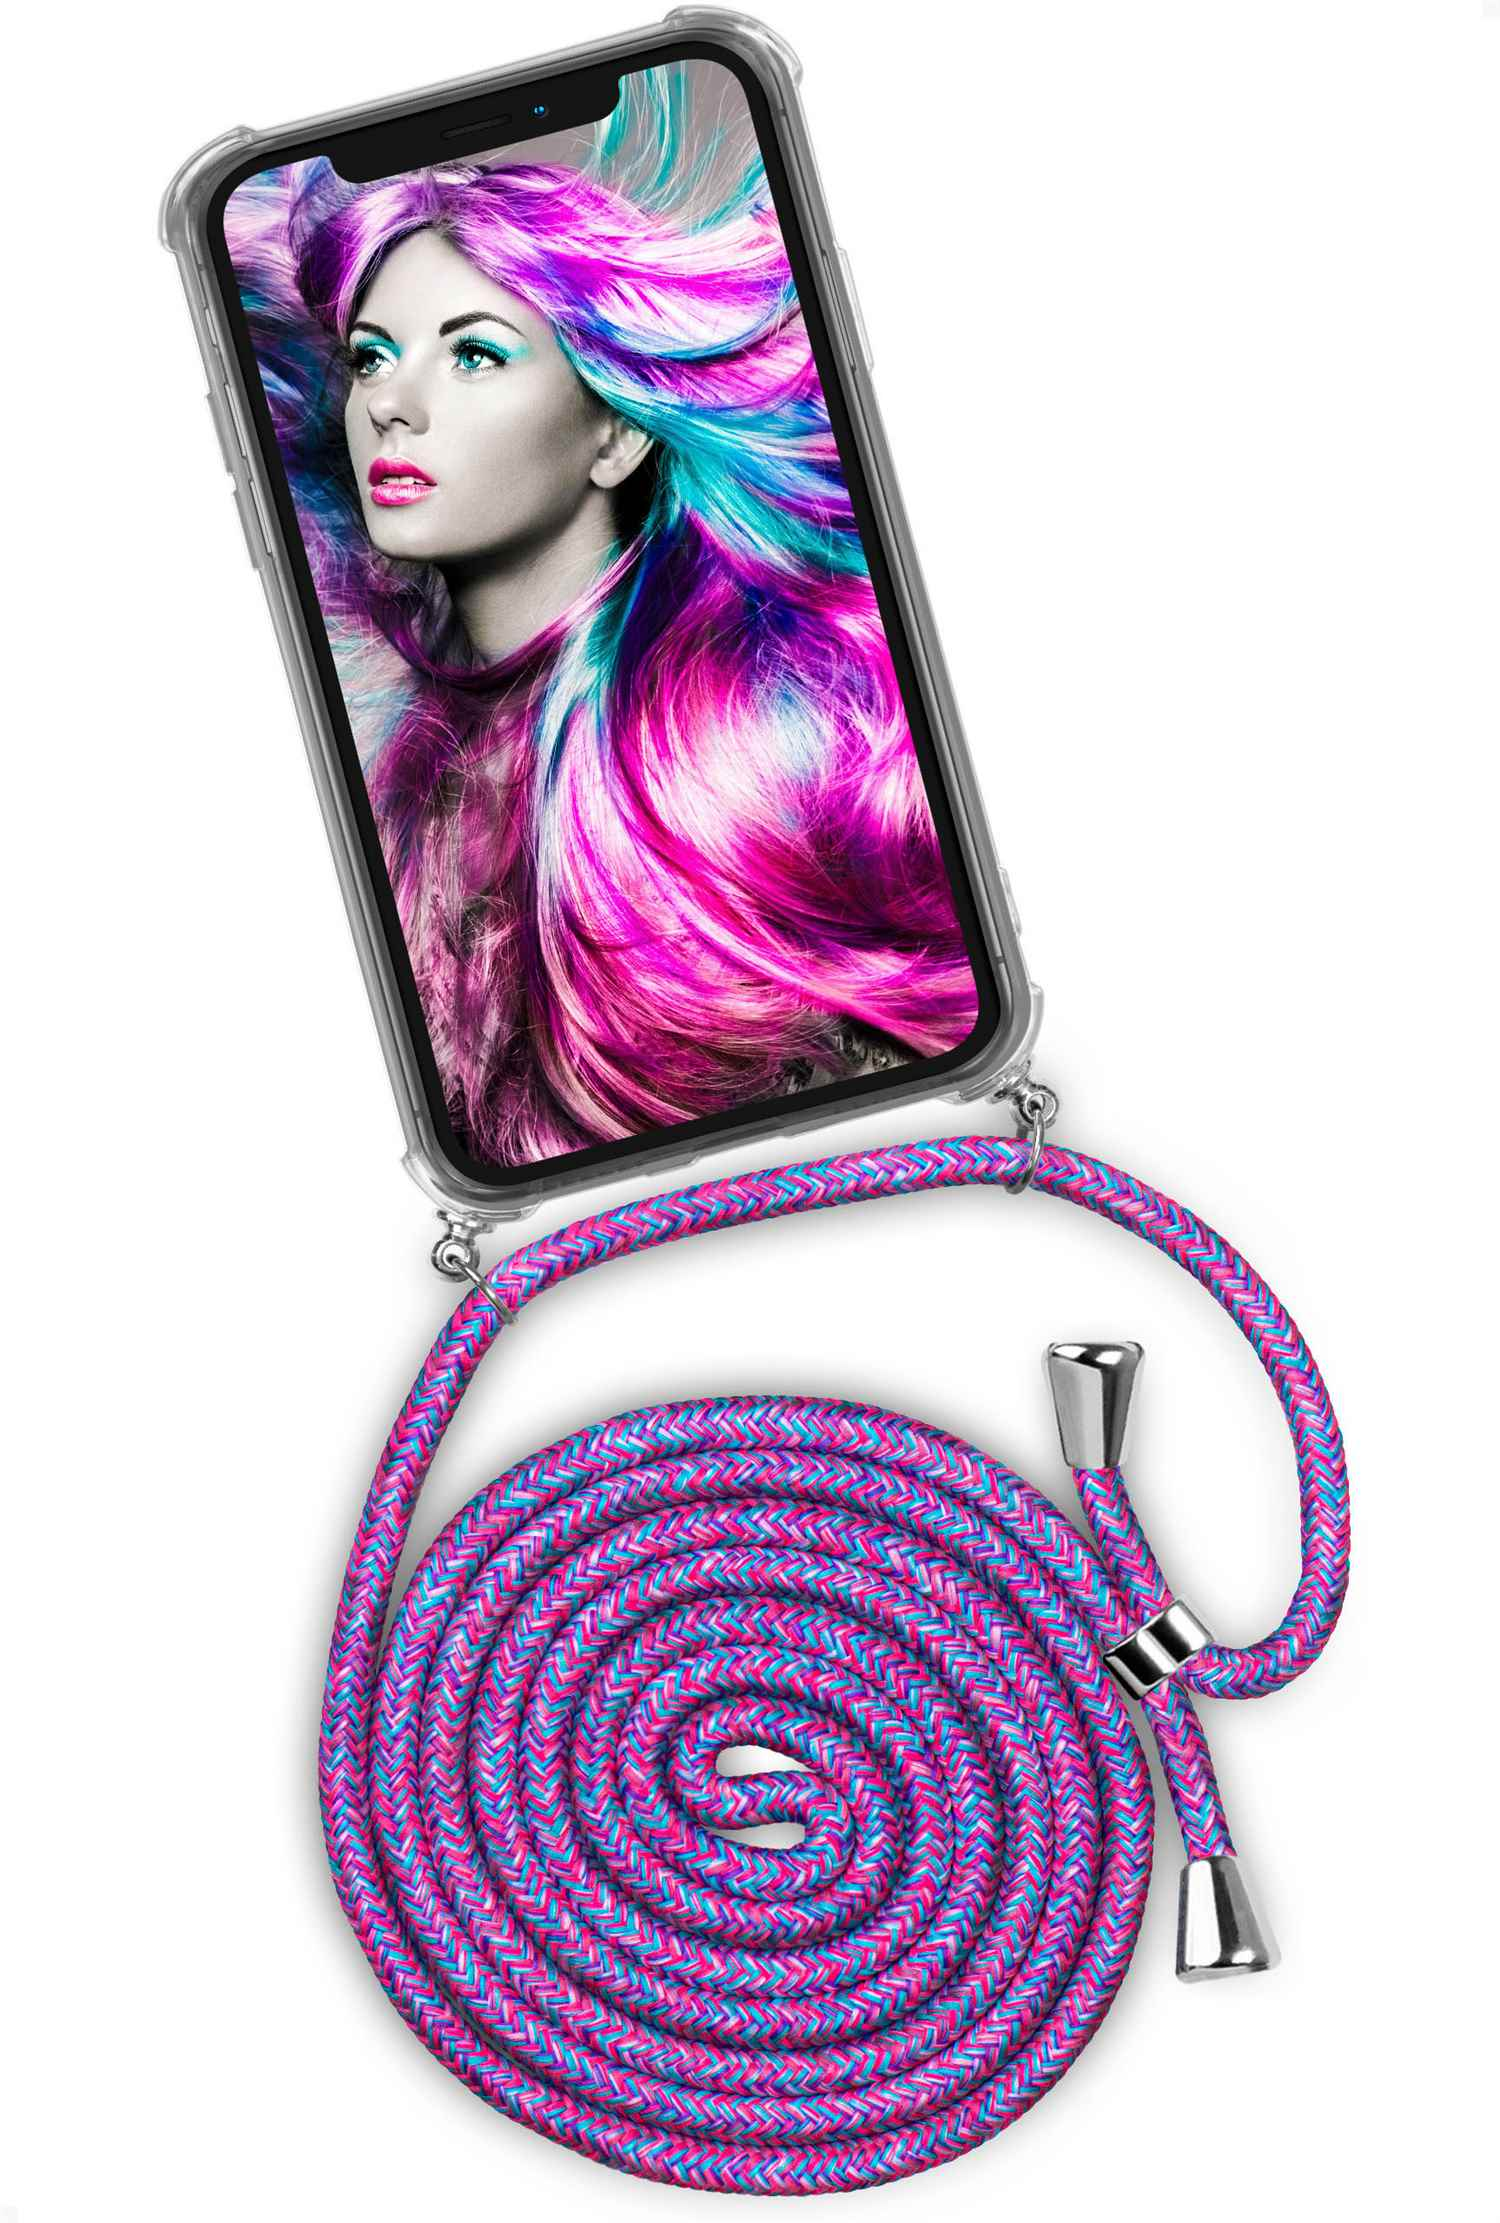 Apple, (Silber) XS, Unicorn Twist ONEFLOW Backcover, Crazy iPhone Case,